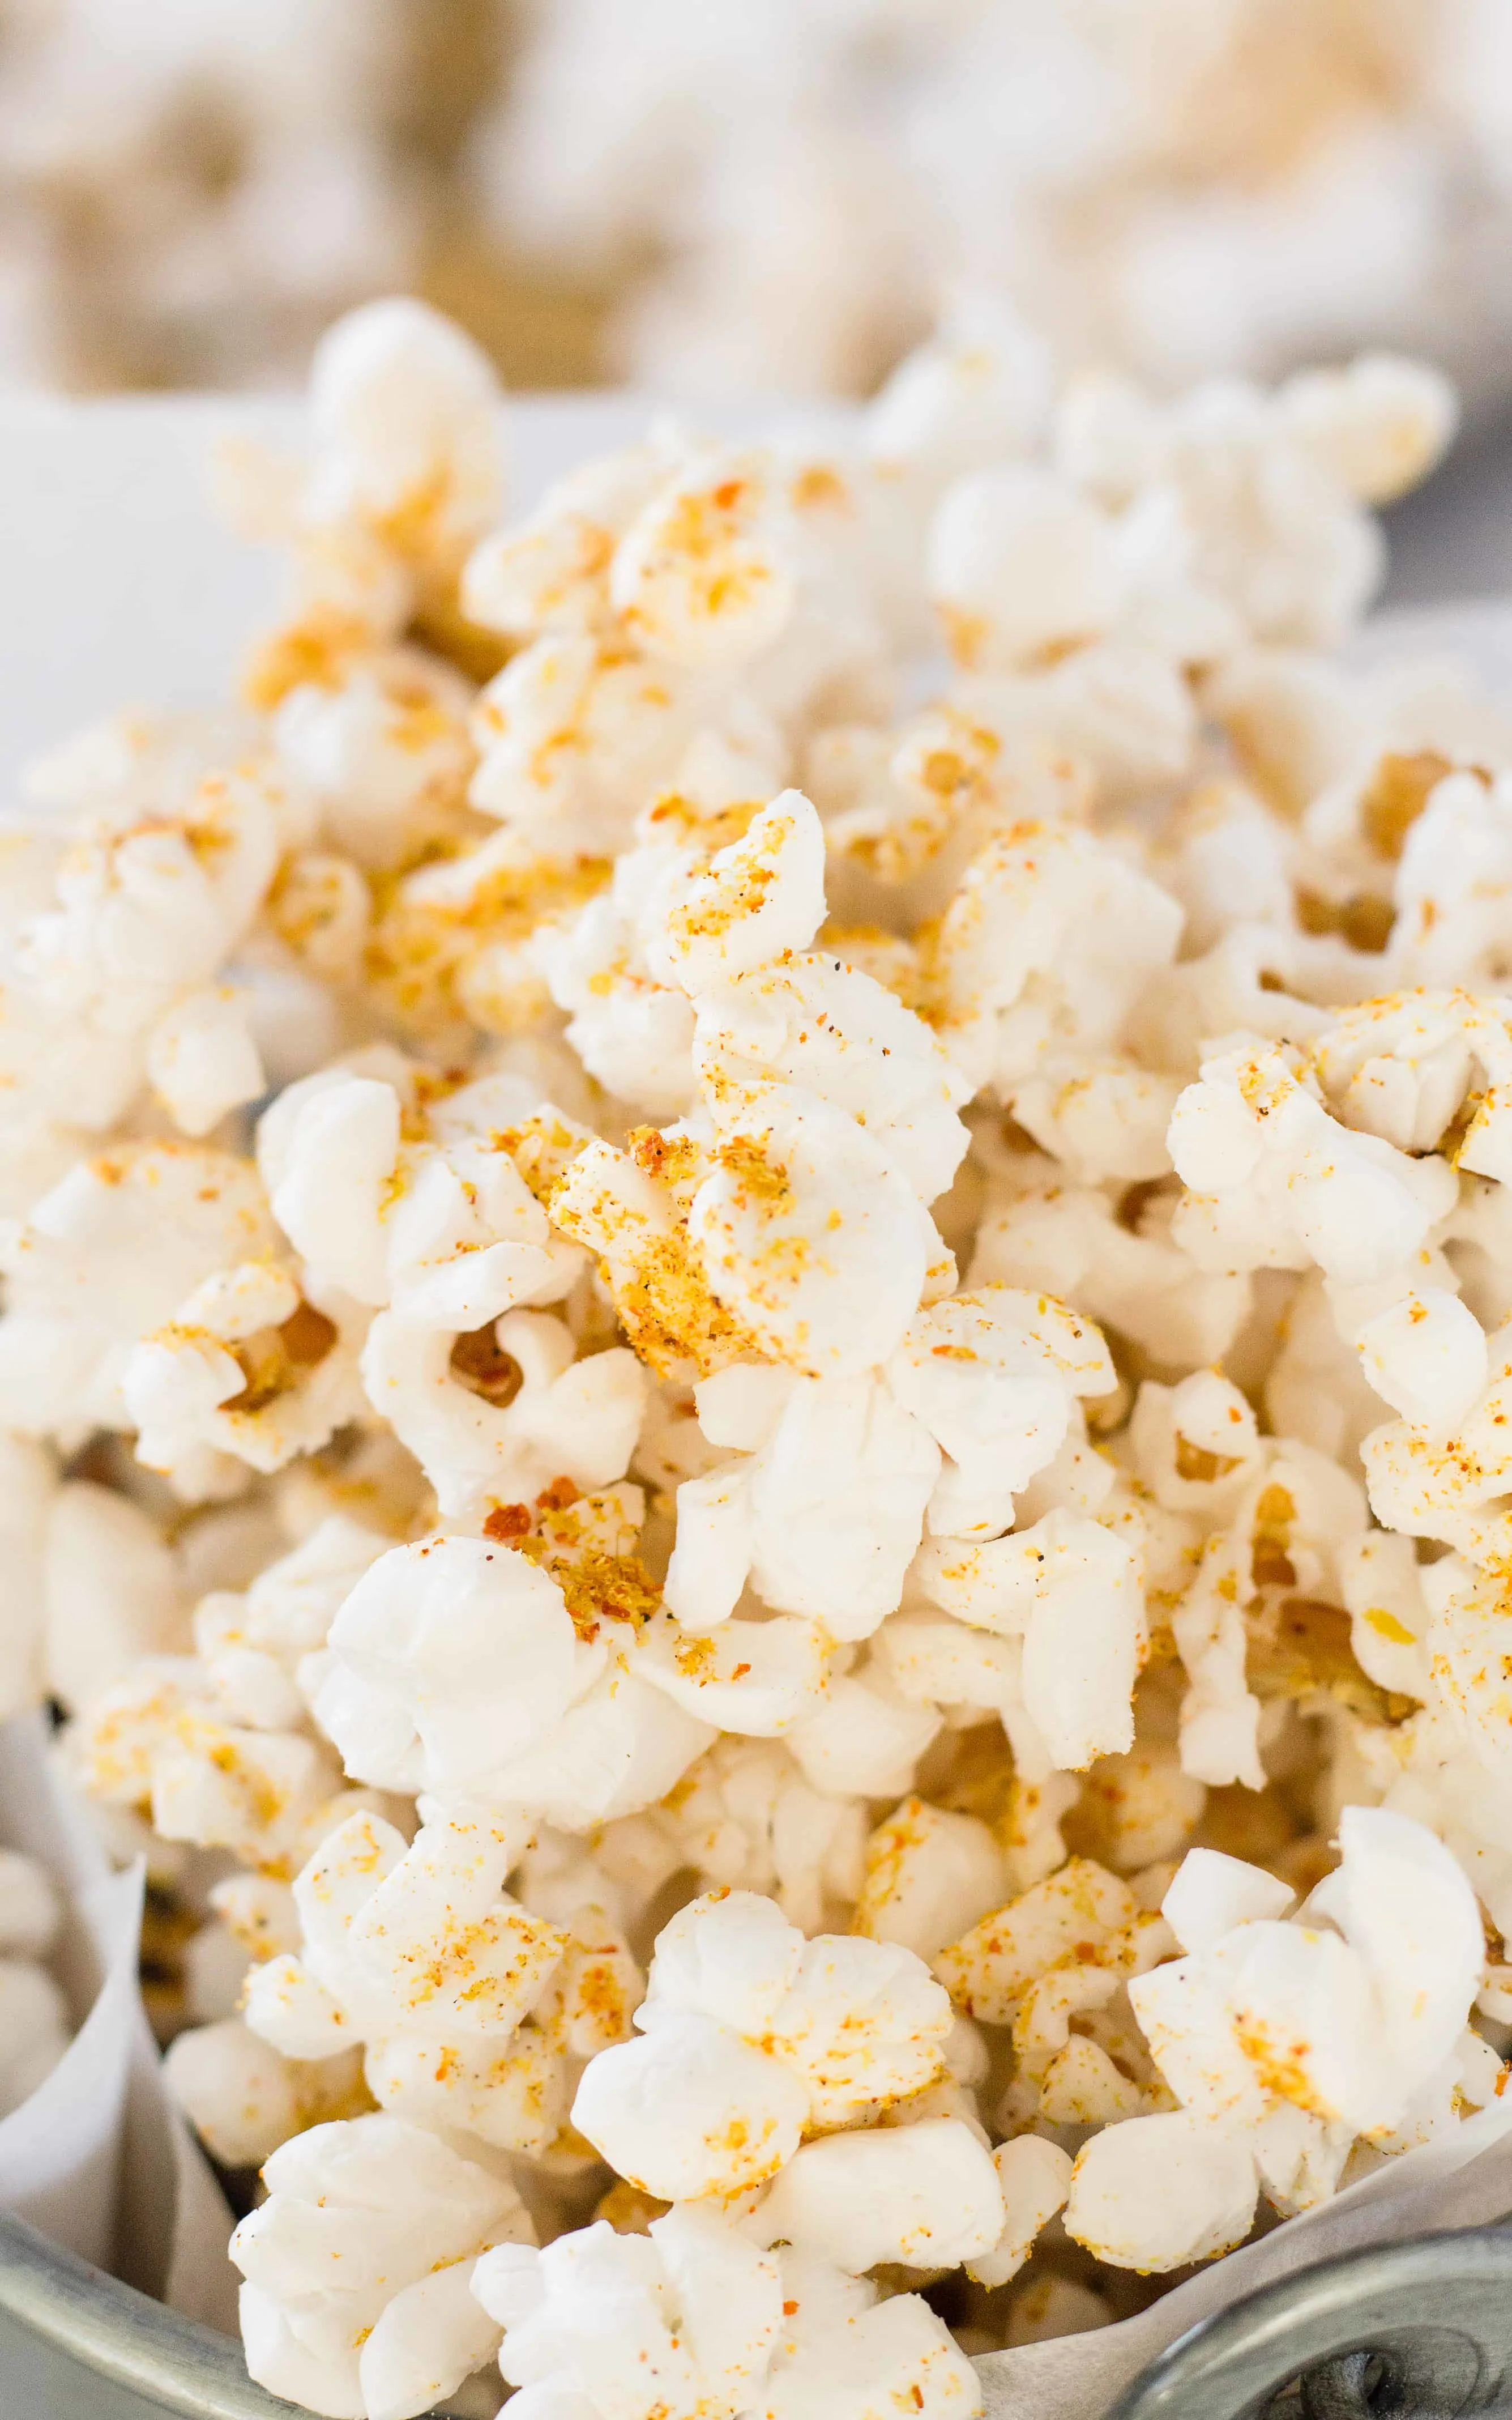 Use as little or as much Doritos Seasoning on this Spicy Nacho Popcorn